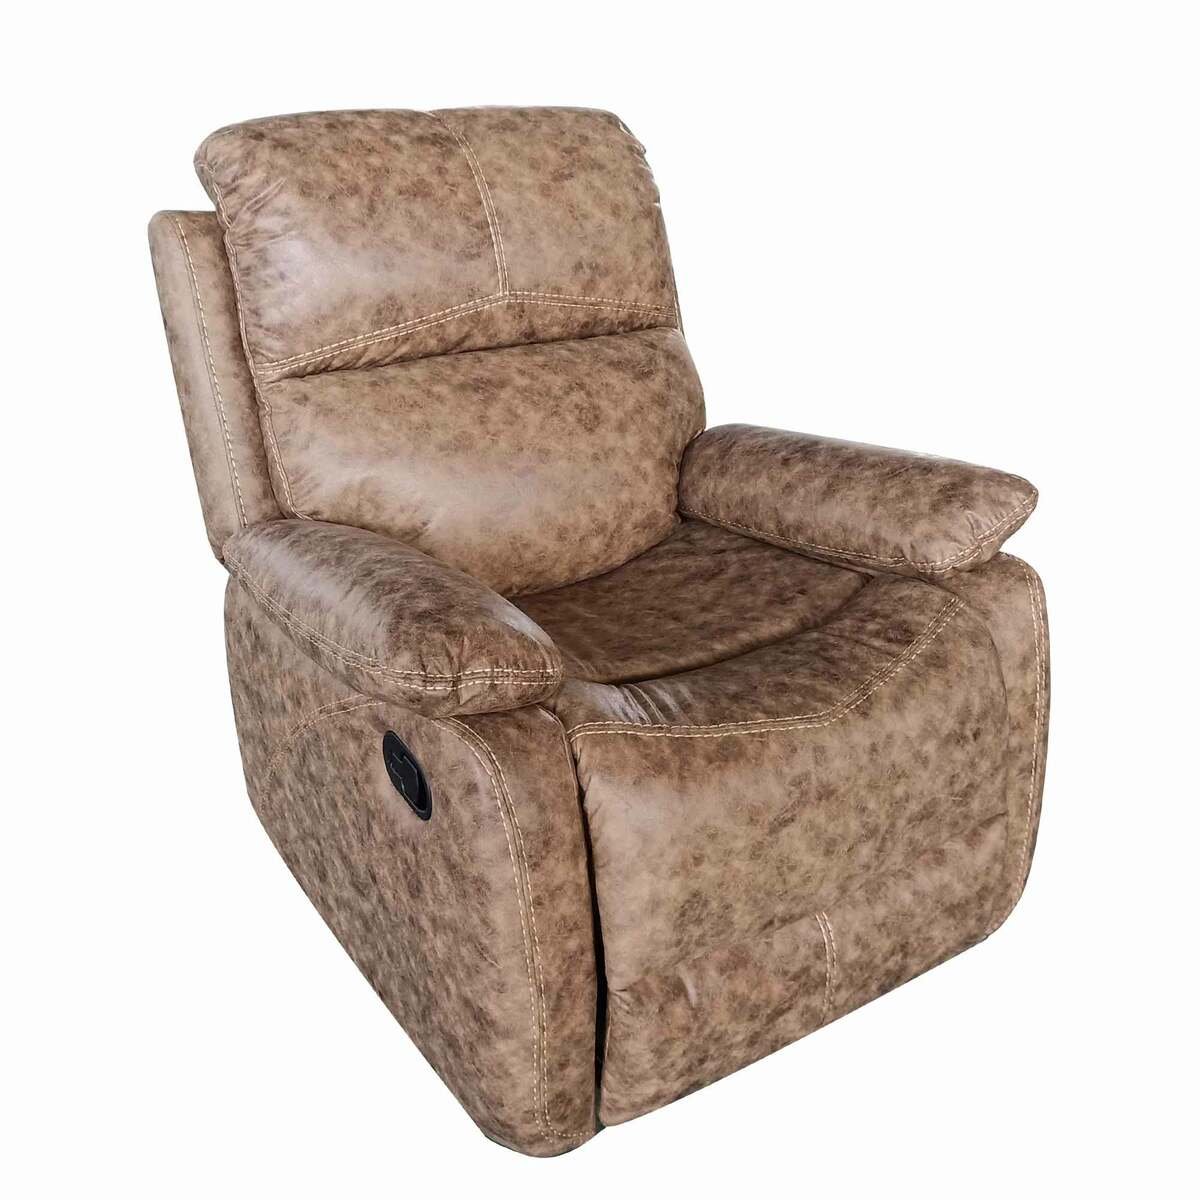 Maple Leaf Home Recliner Sofa Chair Beige, Size: W85 x H100 x L90 to 140